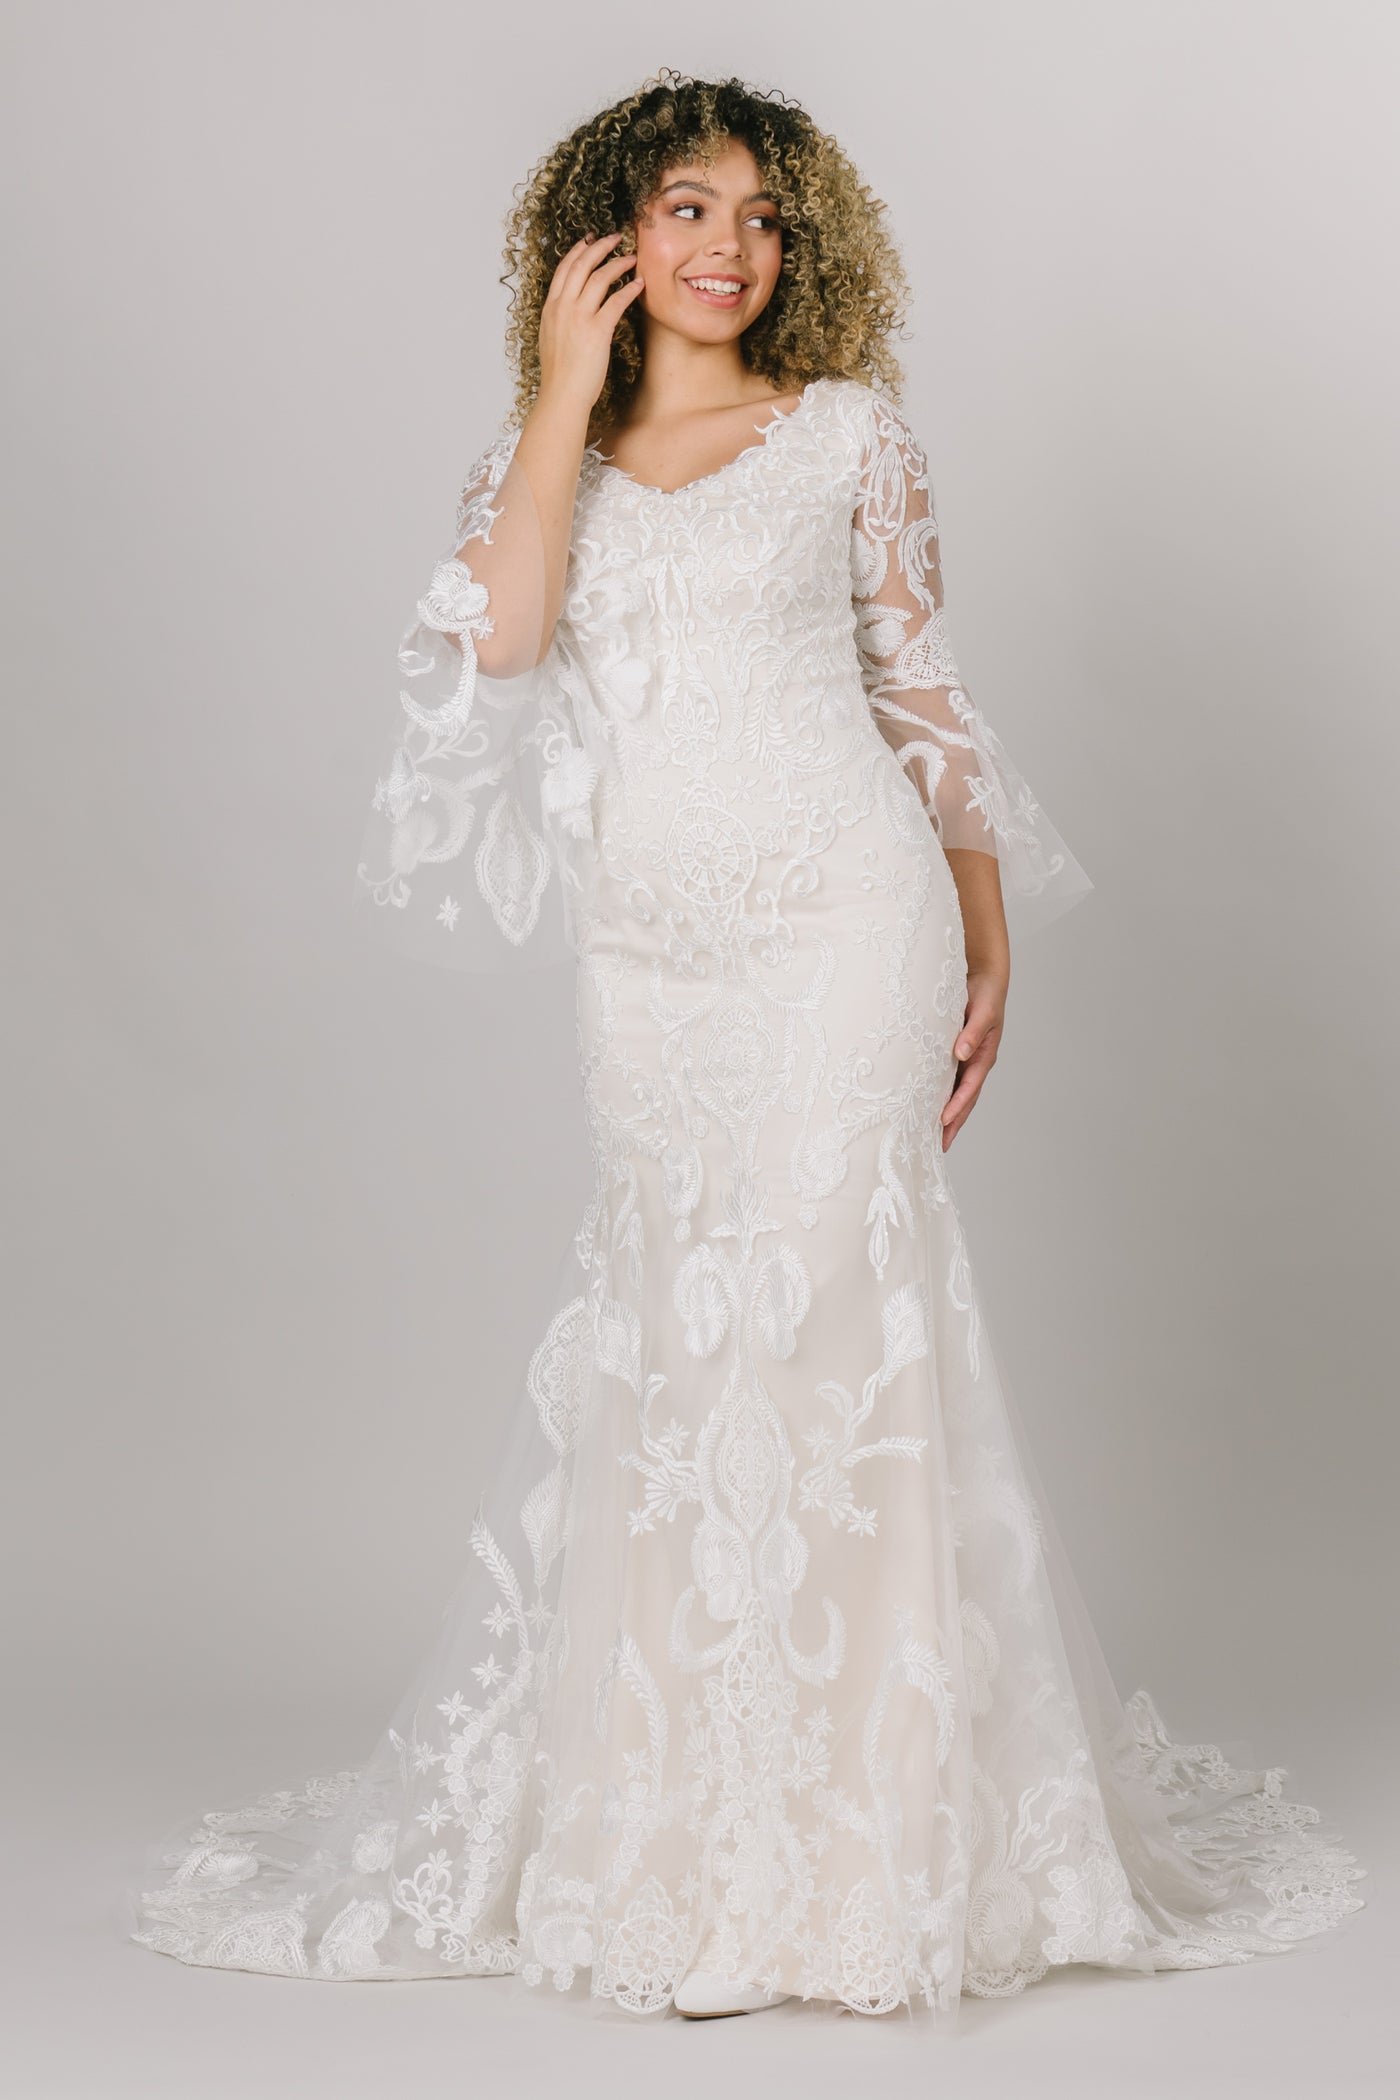 This modest wedding dress has a lace pattern and complemented with beautiful bell sleeves! 